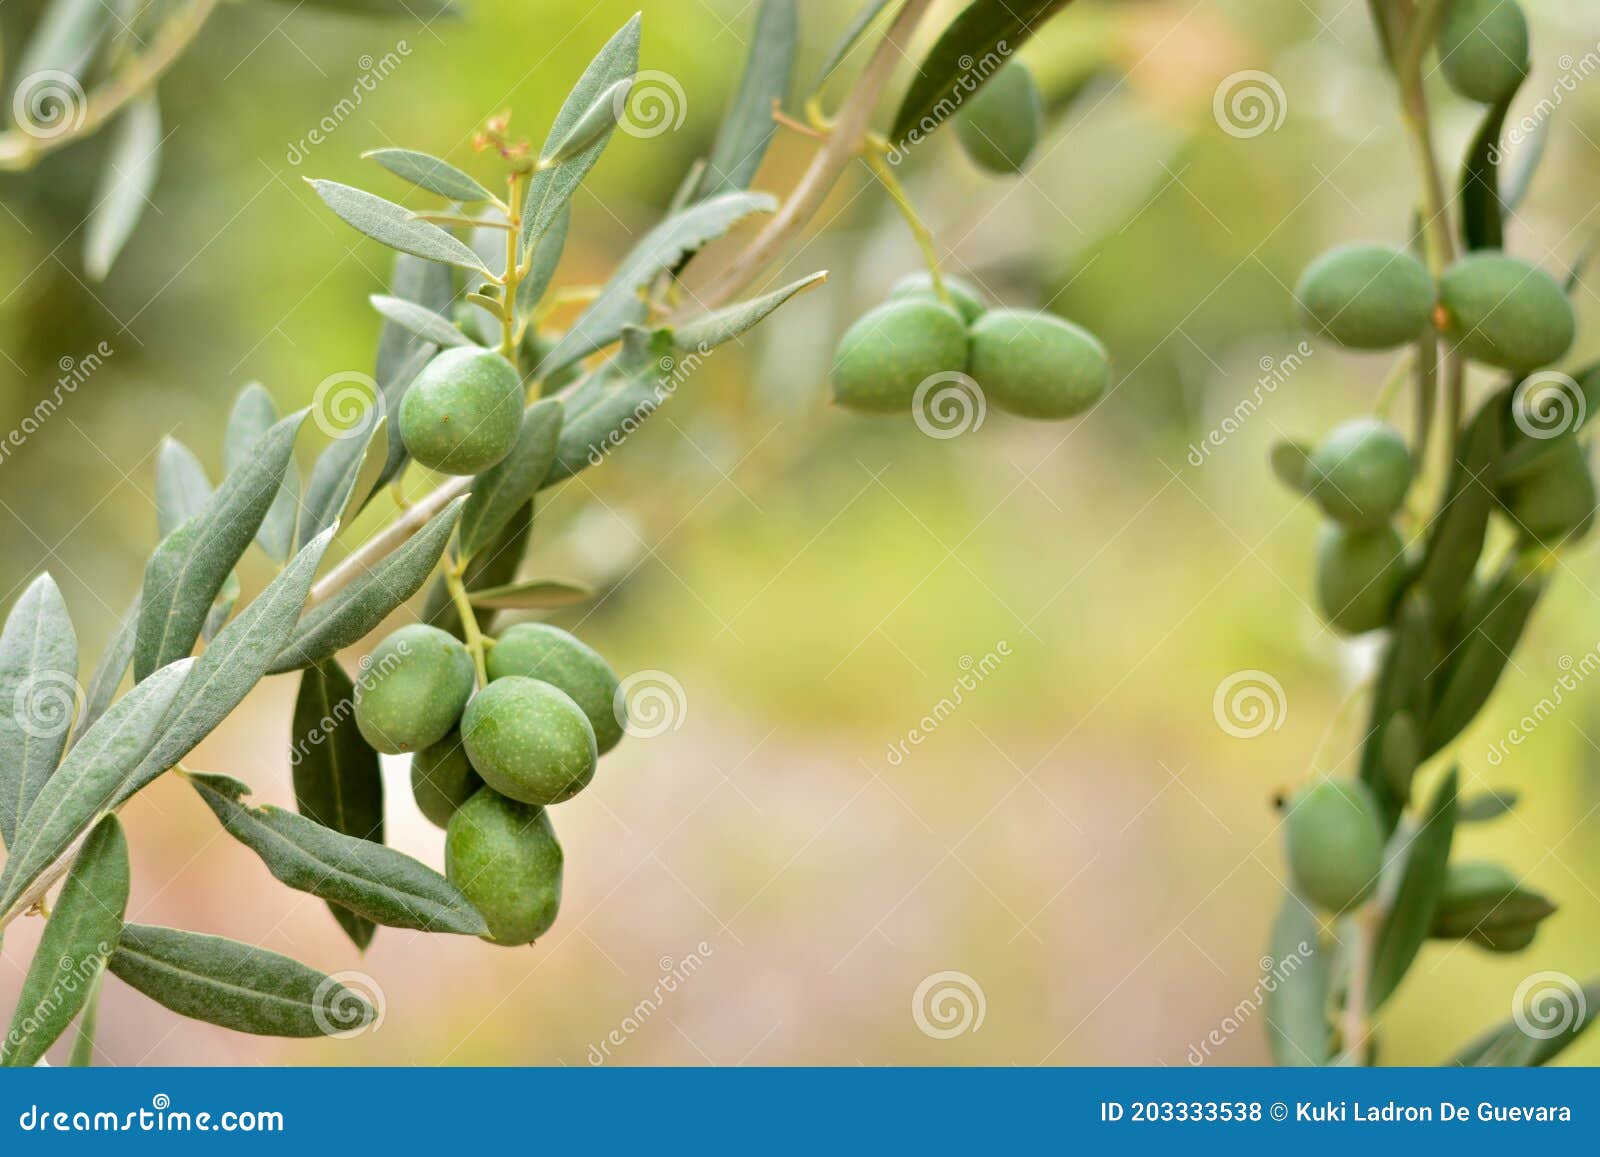 olives hanging from an olive branch